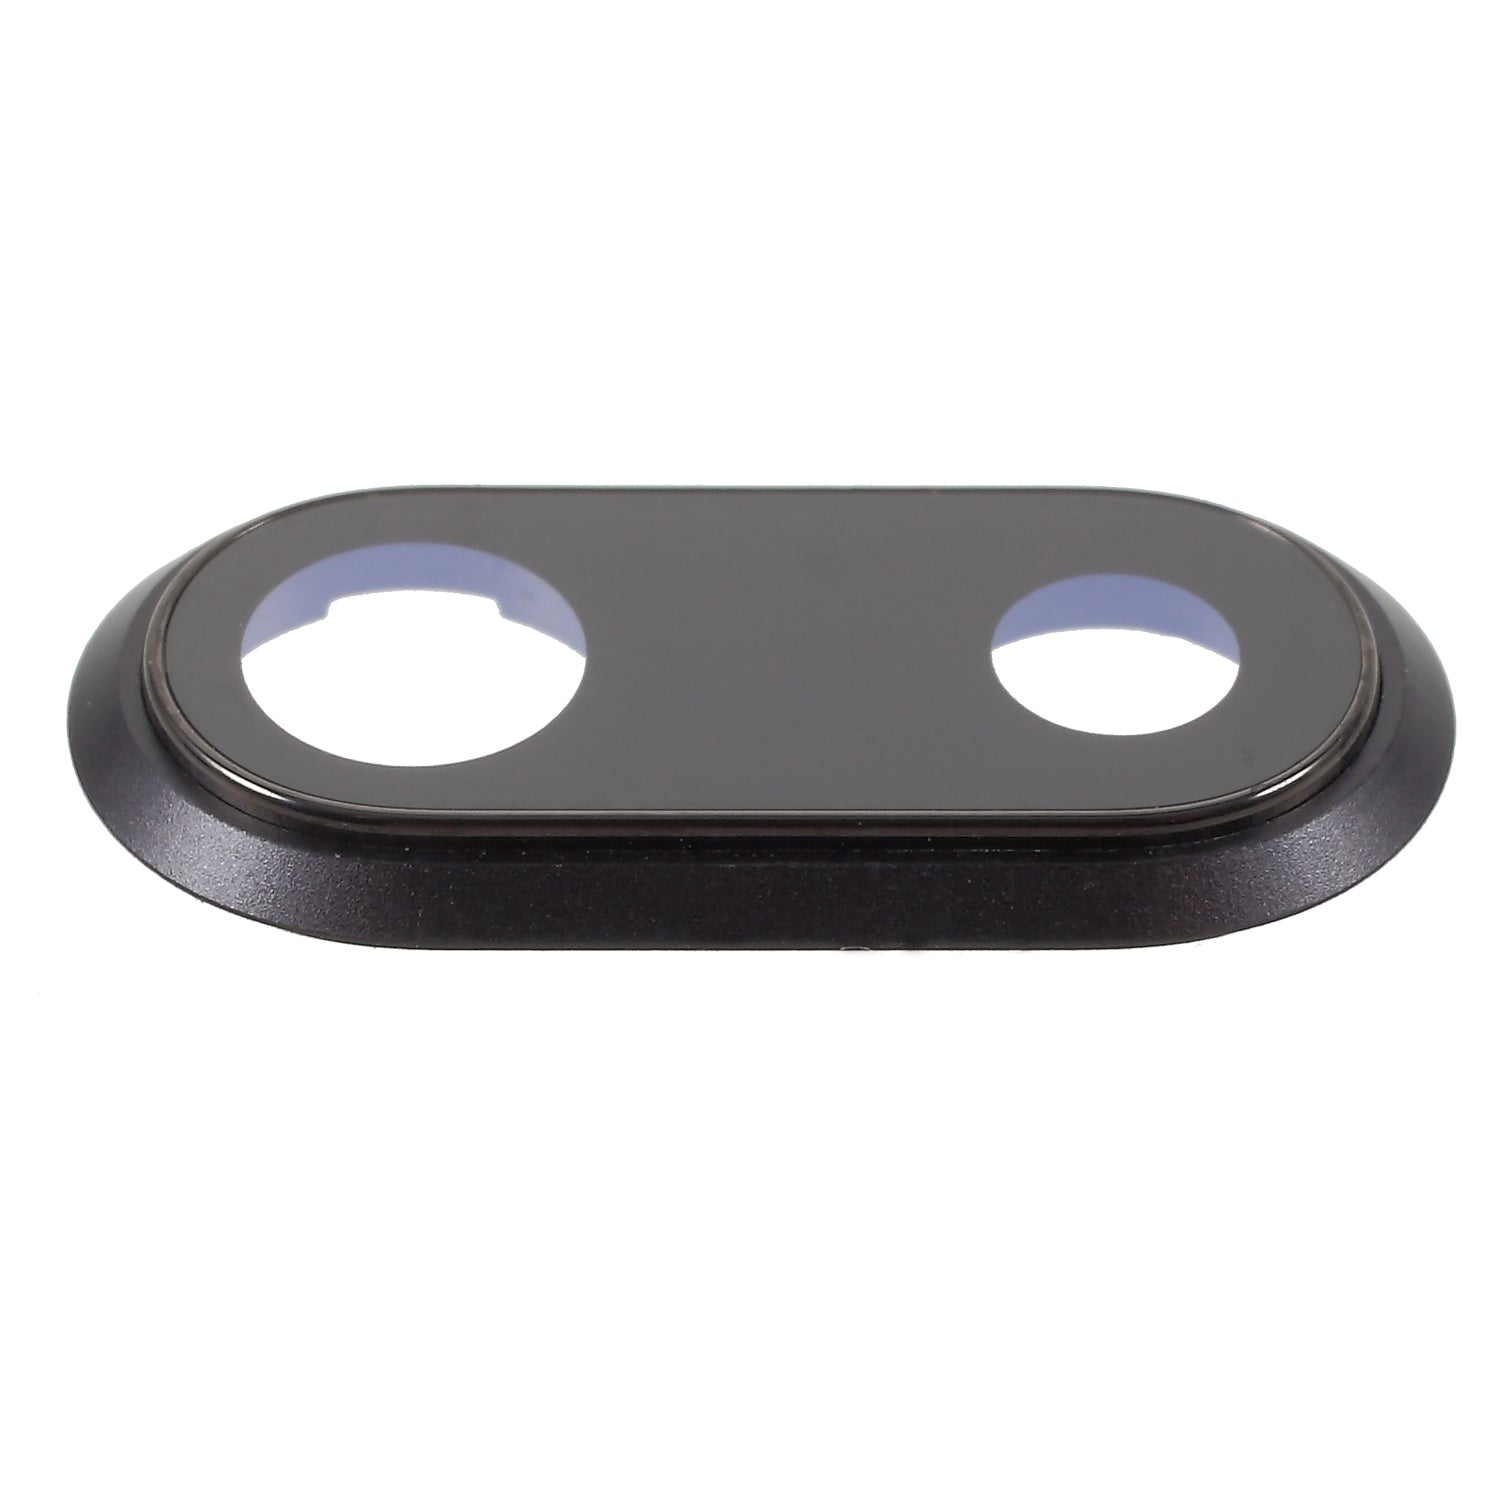 For iPhone 8 Plus 5.5 inch Rear Camera Lens Ring Cover with Glass Lens - Black